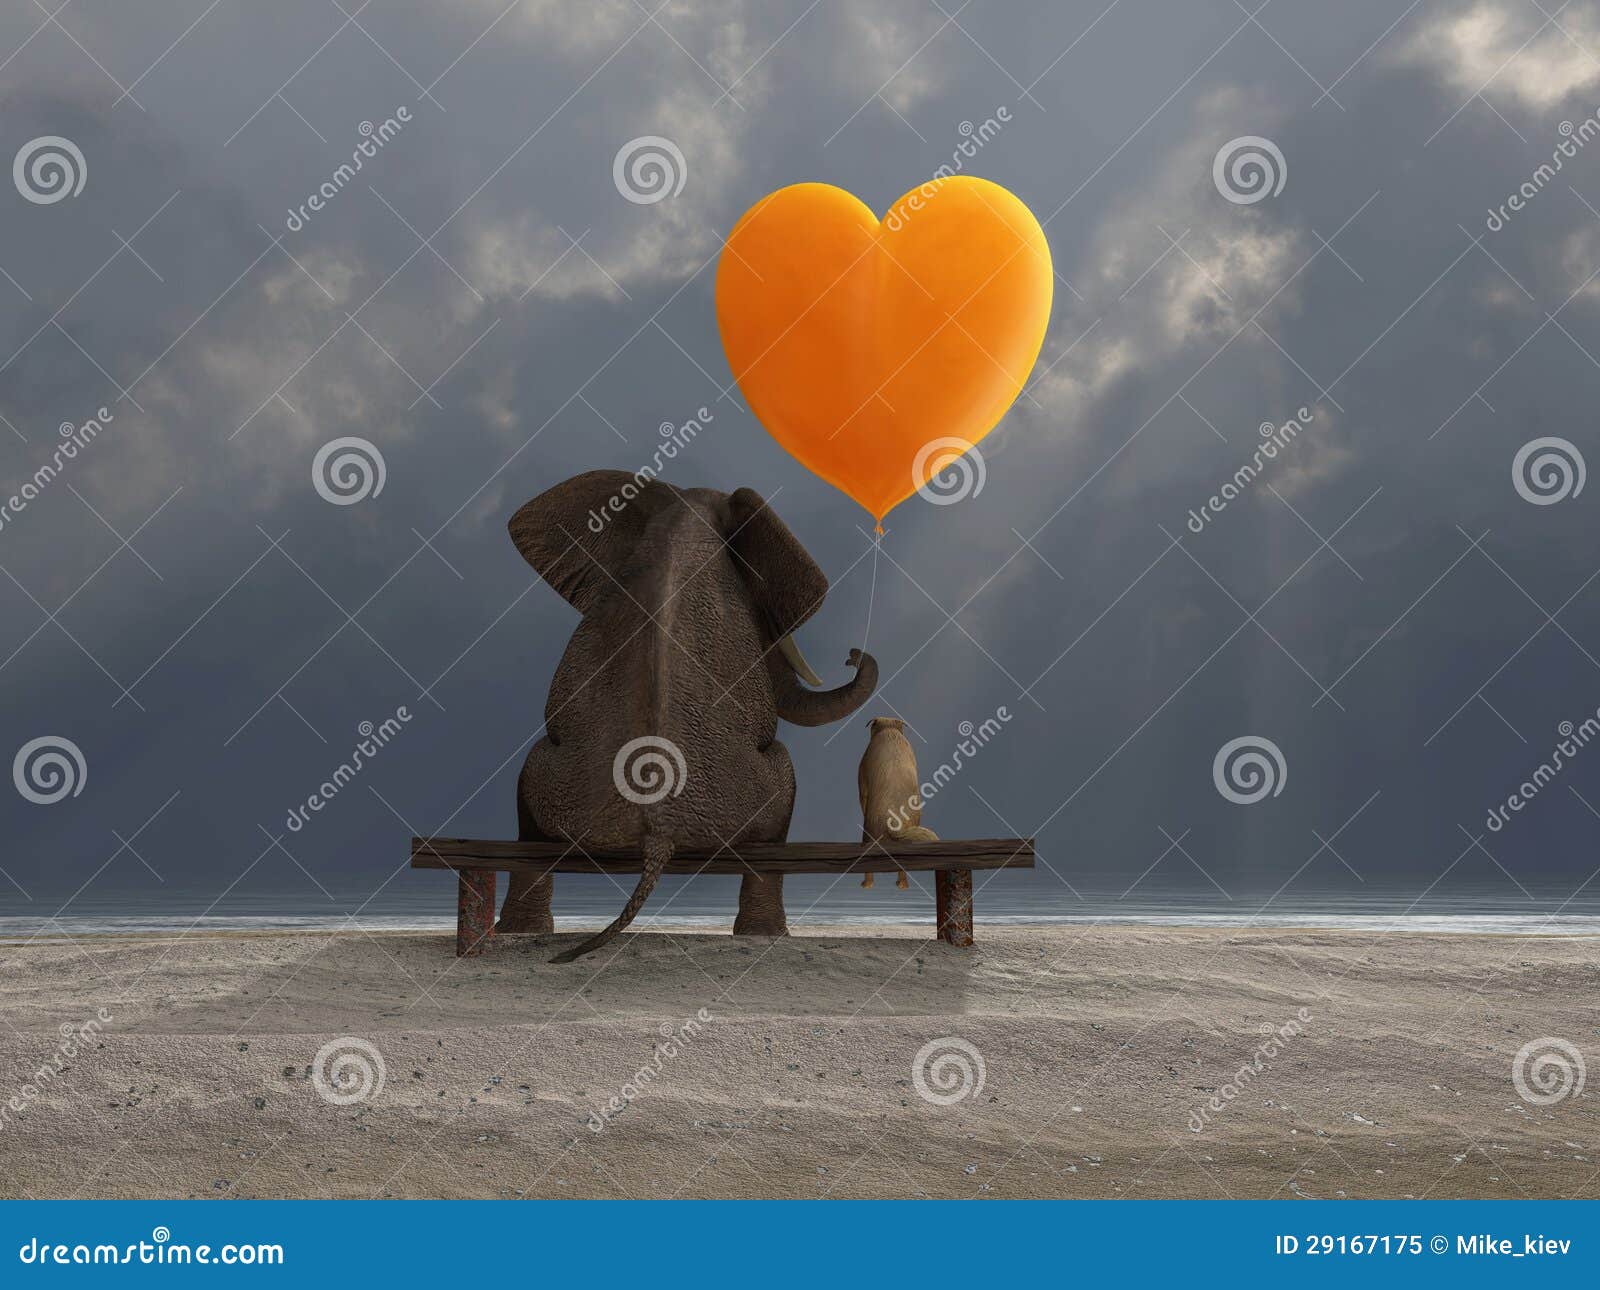 elephant and dog holding a heart d balloon